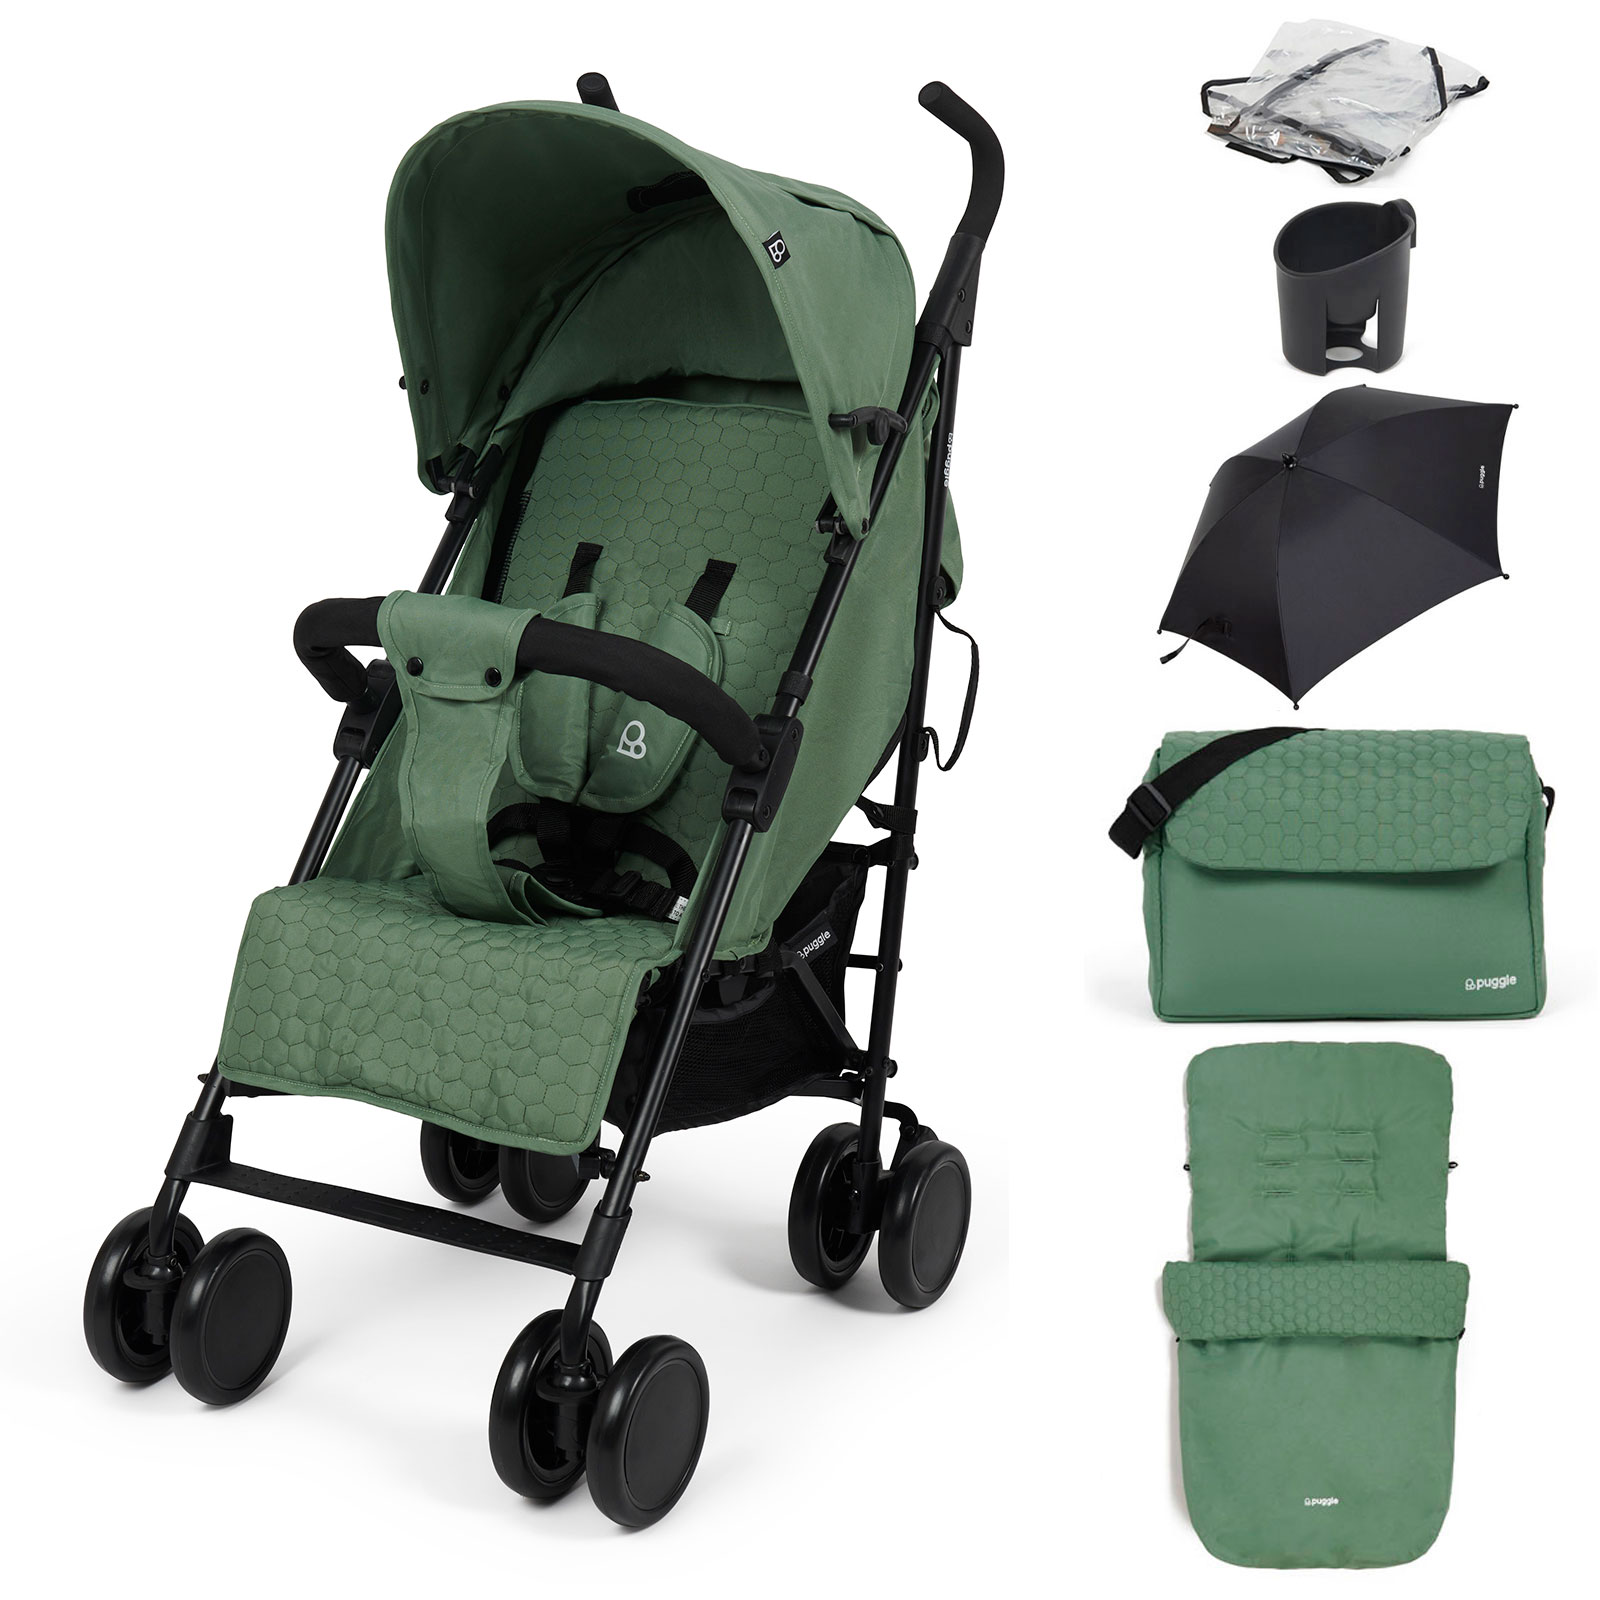 Puggle Litemax Pushchair Stroller with Raincover, Cupholder, Universal Footmuff, Parasol and Changing Bag with Mat - Sage Green